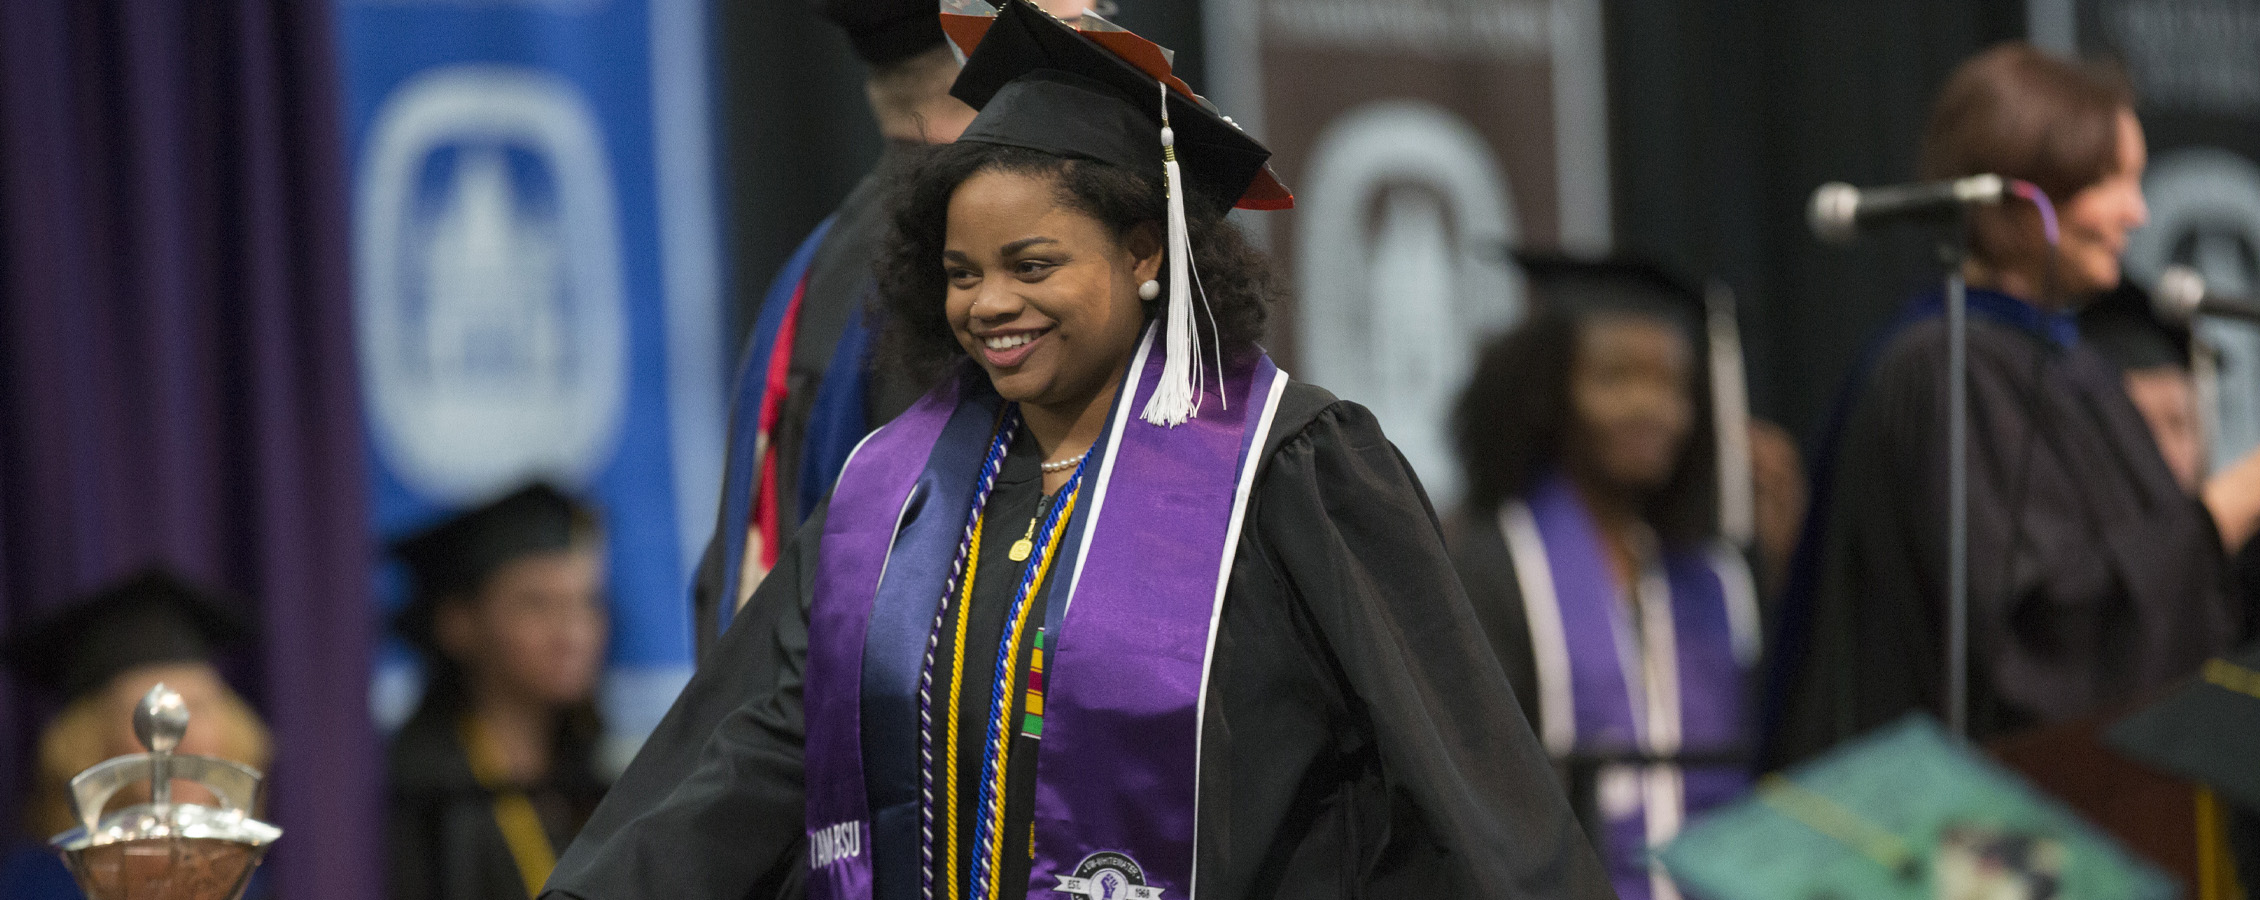 A student crosses the stage at graduation.